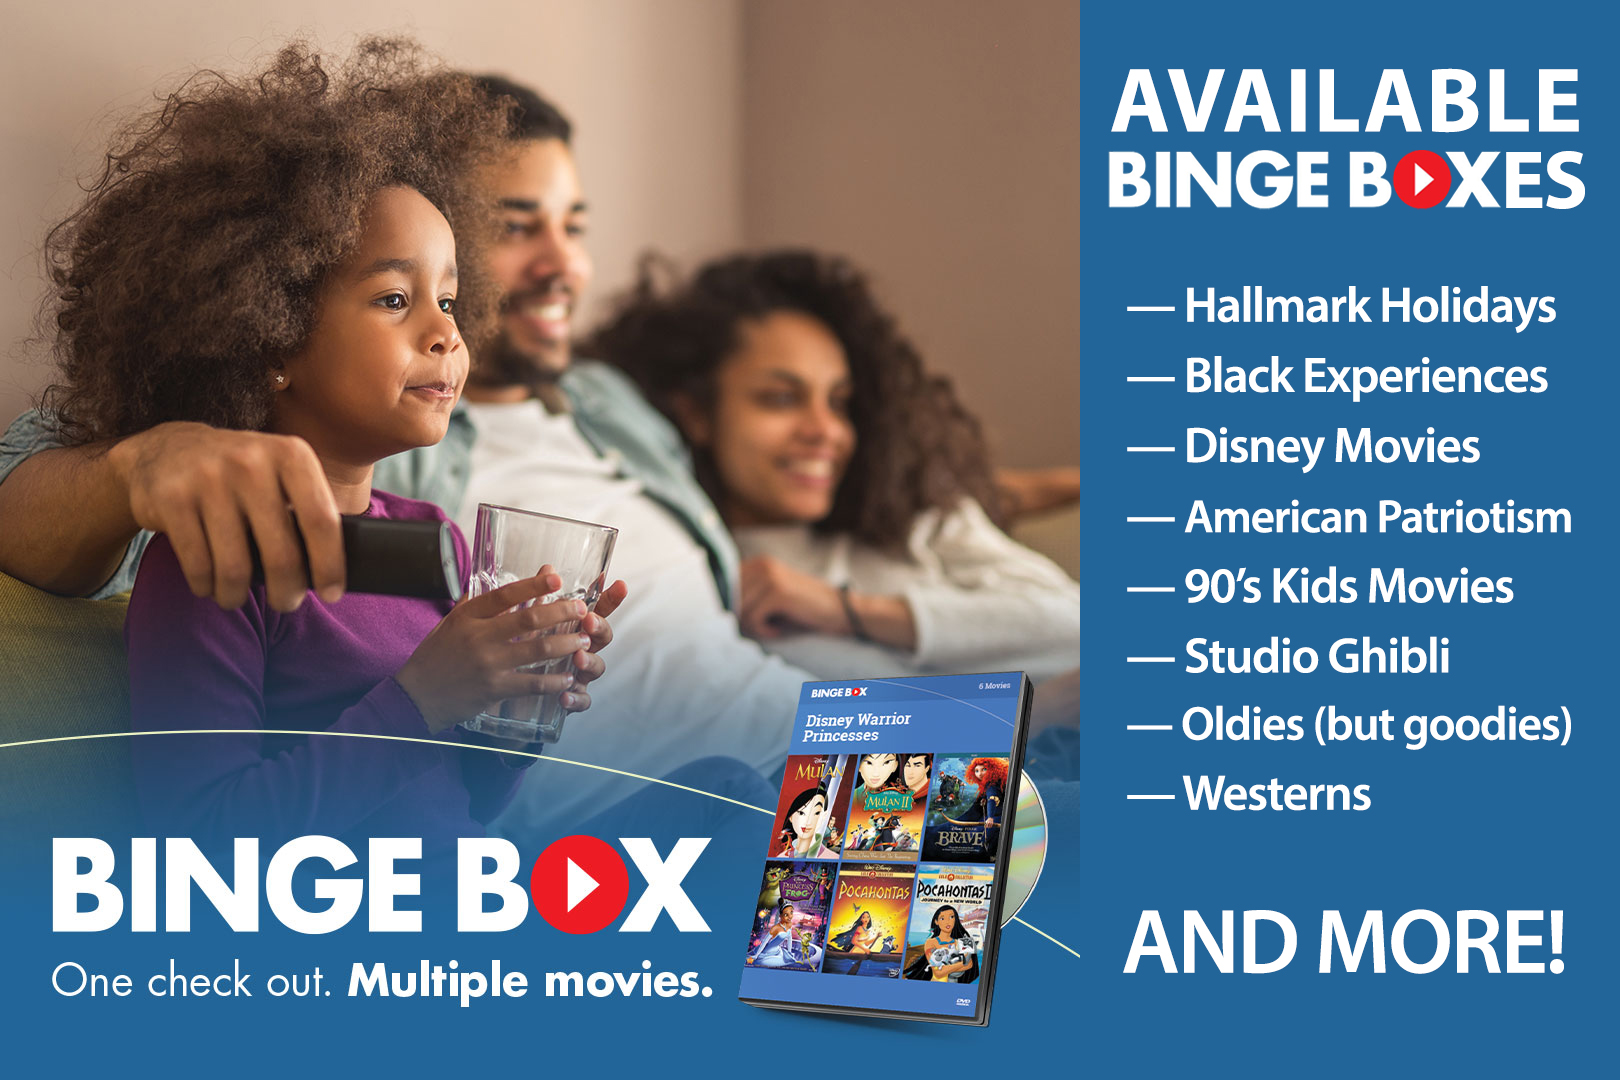 Binge Box. One check out. Multiple movies. Happy family snuggled on couch together.